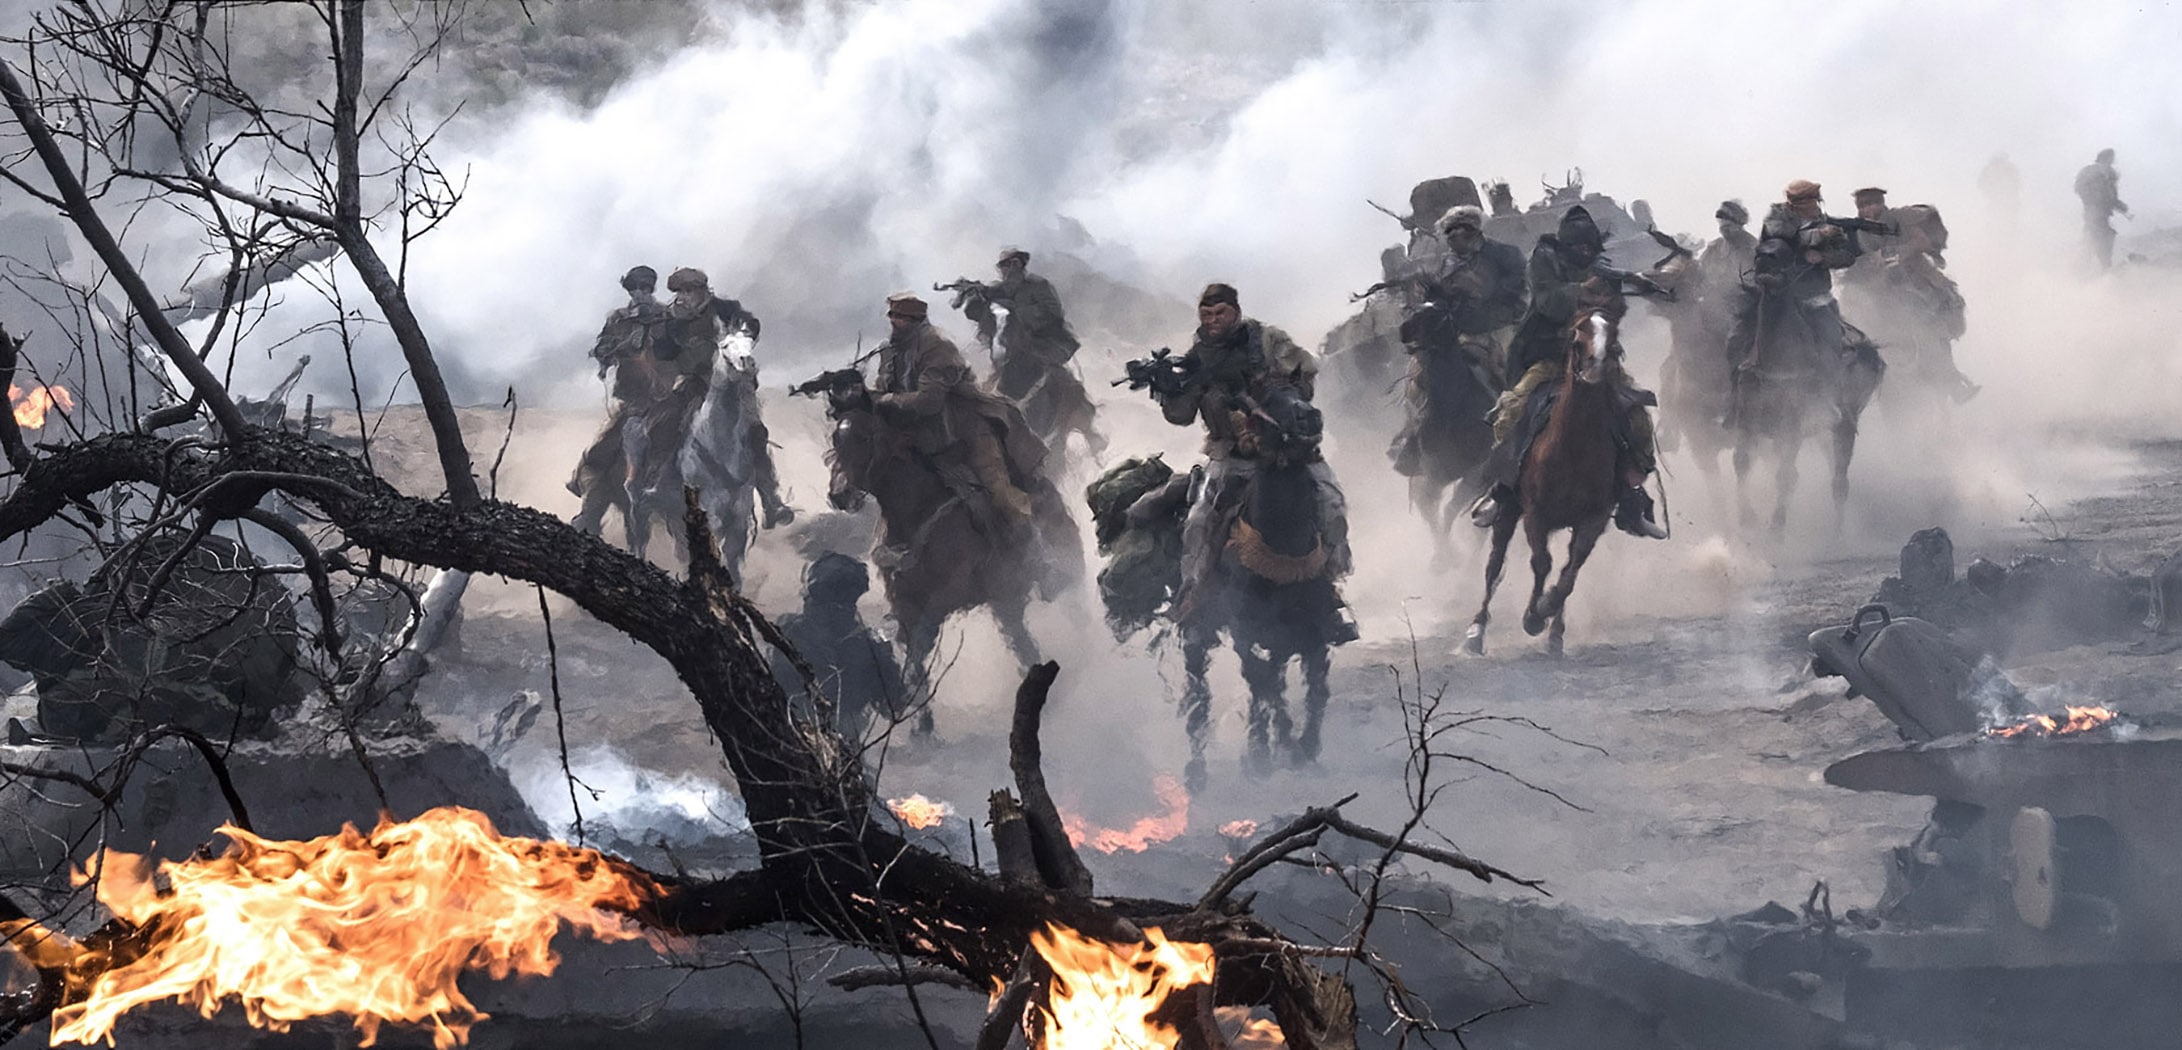 A scene from Jerry Bruckheimer Films’, Black Label Media’ and Alcon Entertainment’s war drama “12 STRONG,” a Warner Bros. Pictures release. Photo by David James